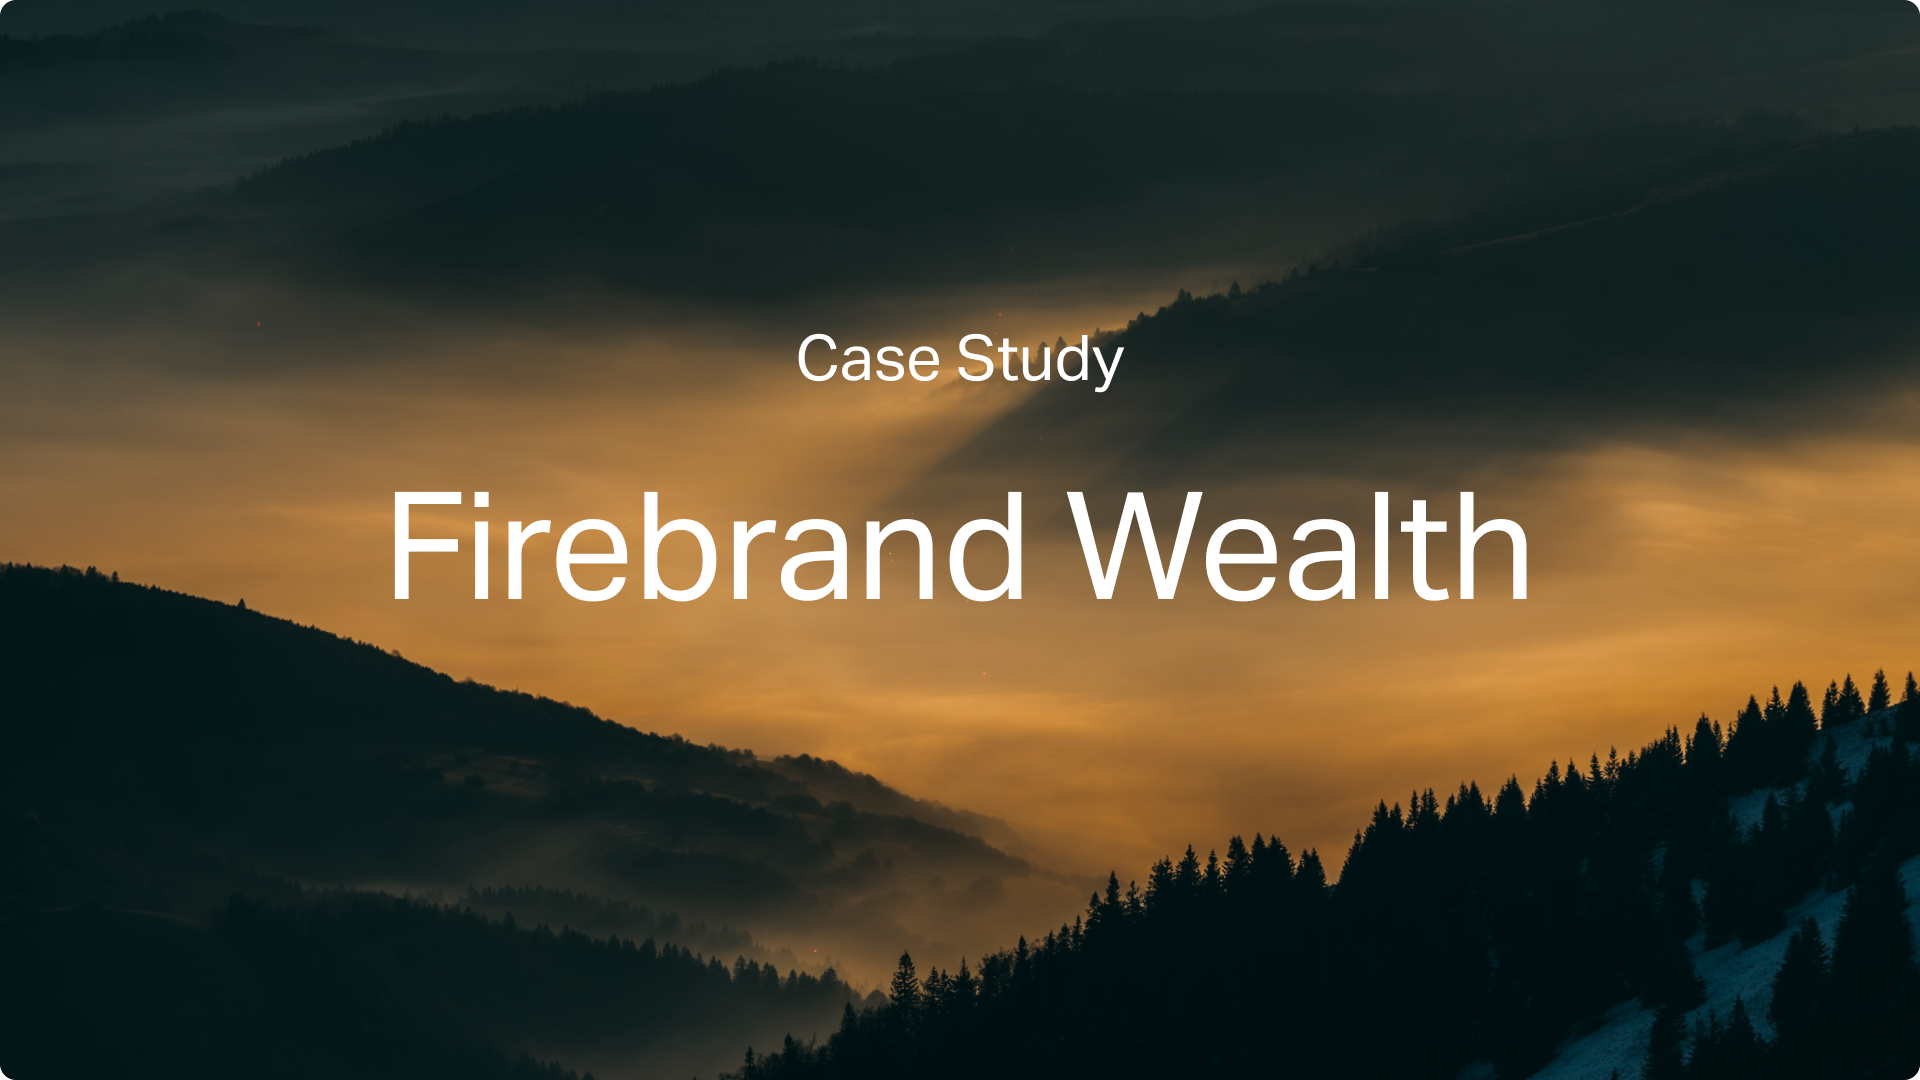 Exponential growth and exceptional client service–Firebrand does both.